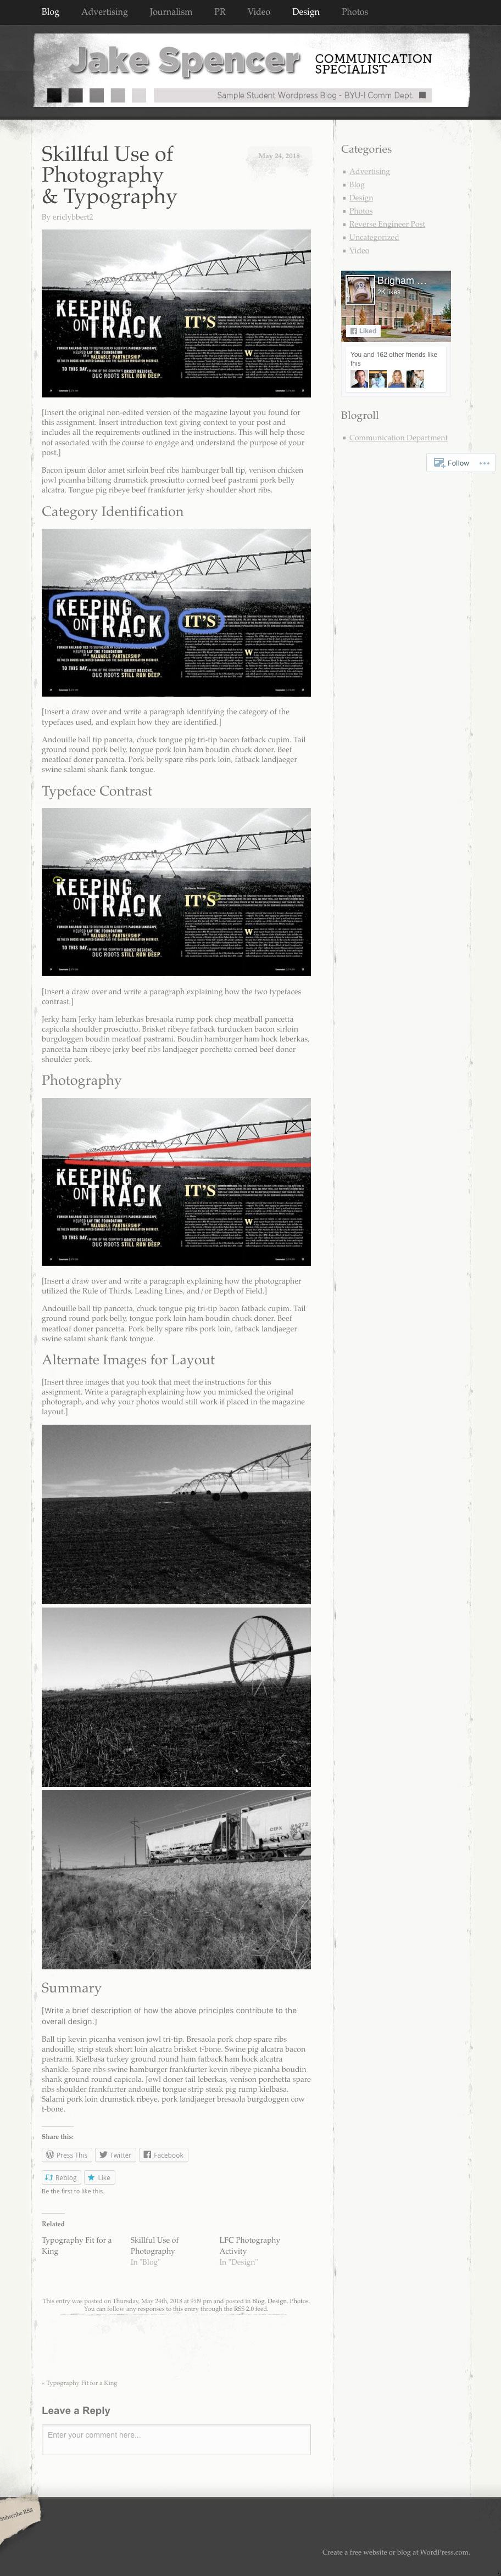 A screenshot of the Skillful Use Of Photography And Typography blog post by Jake Spencer.